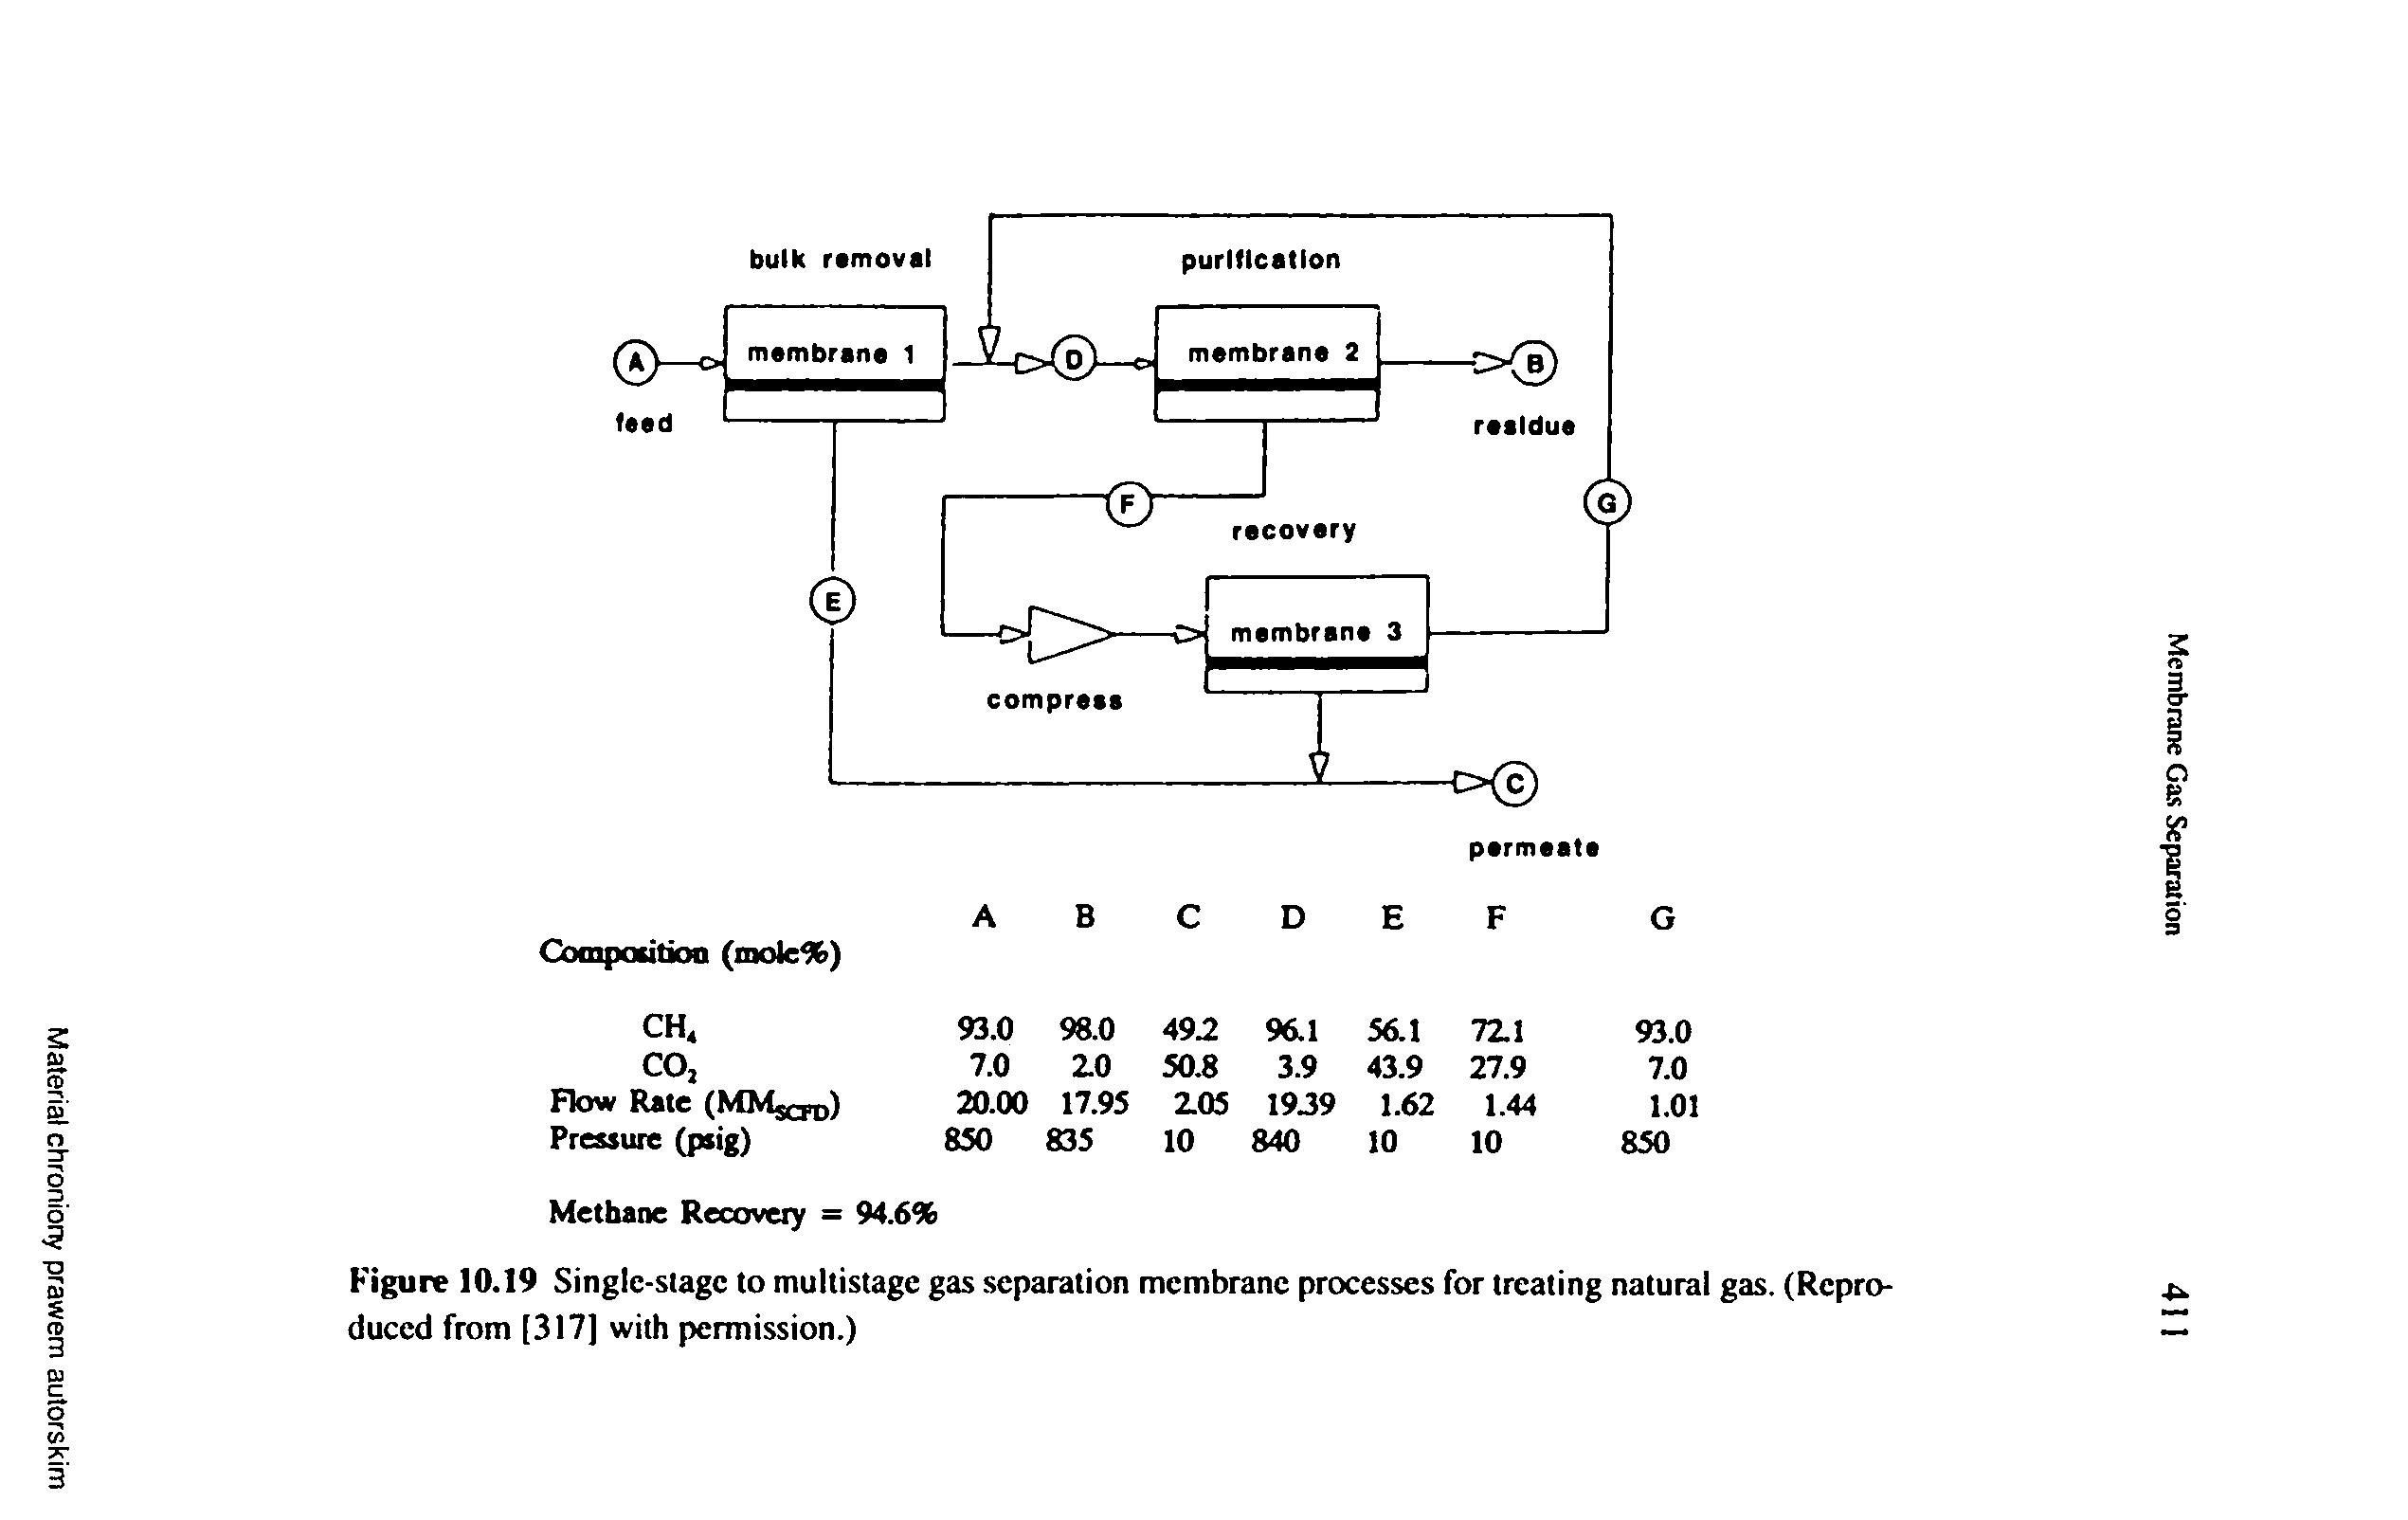 Figure 10.19 Single-stage to multistage gas separation membrane processes for treating natural gas, (Reproduced from [317] with permission.)...